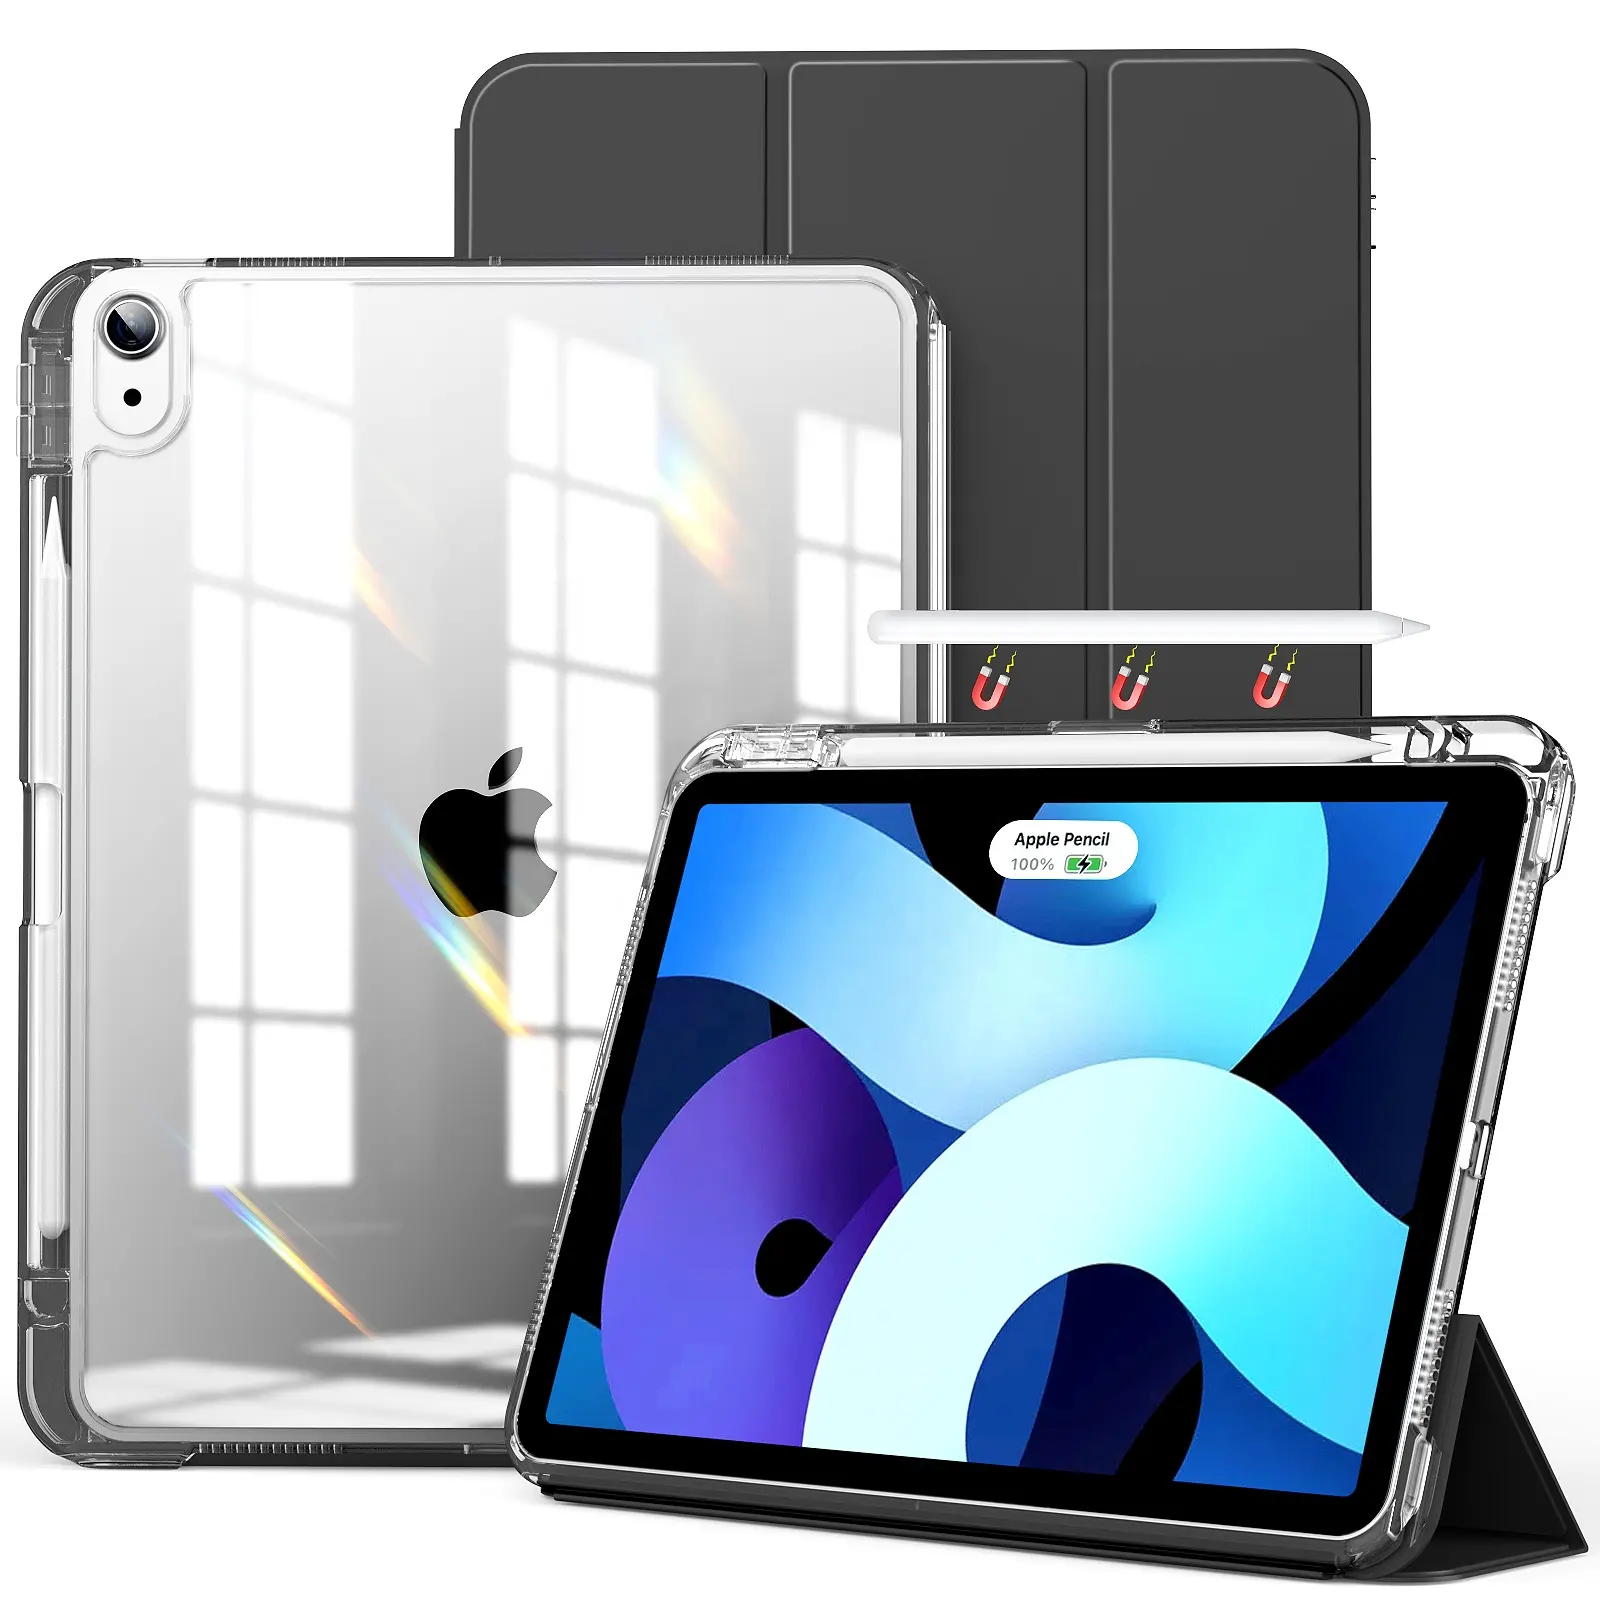 Tri-fold Stand Folio Shockproof Protective Cases Smart Cover for iPad Air 4 5 Gen 10.9 Inch Case